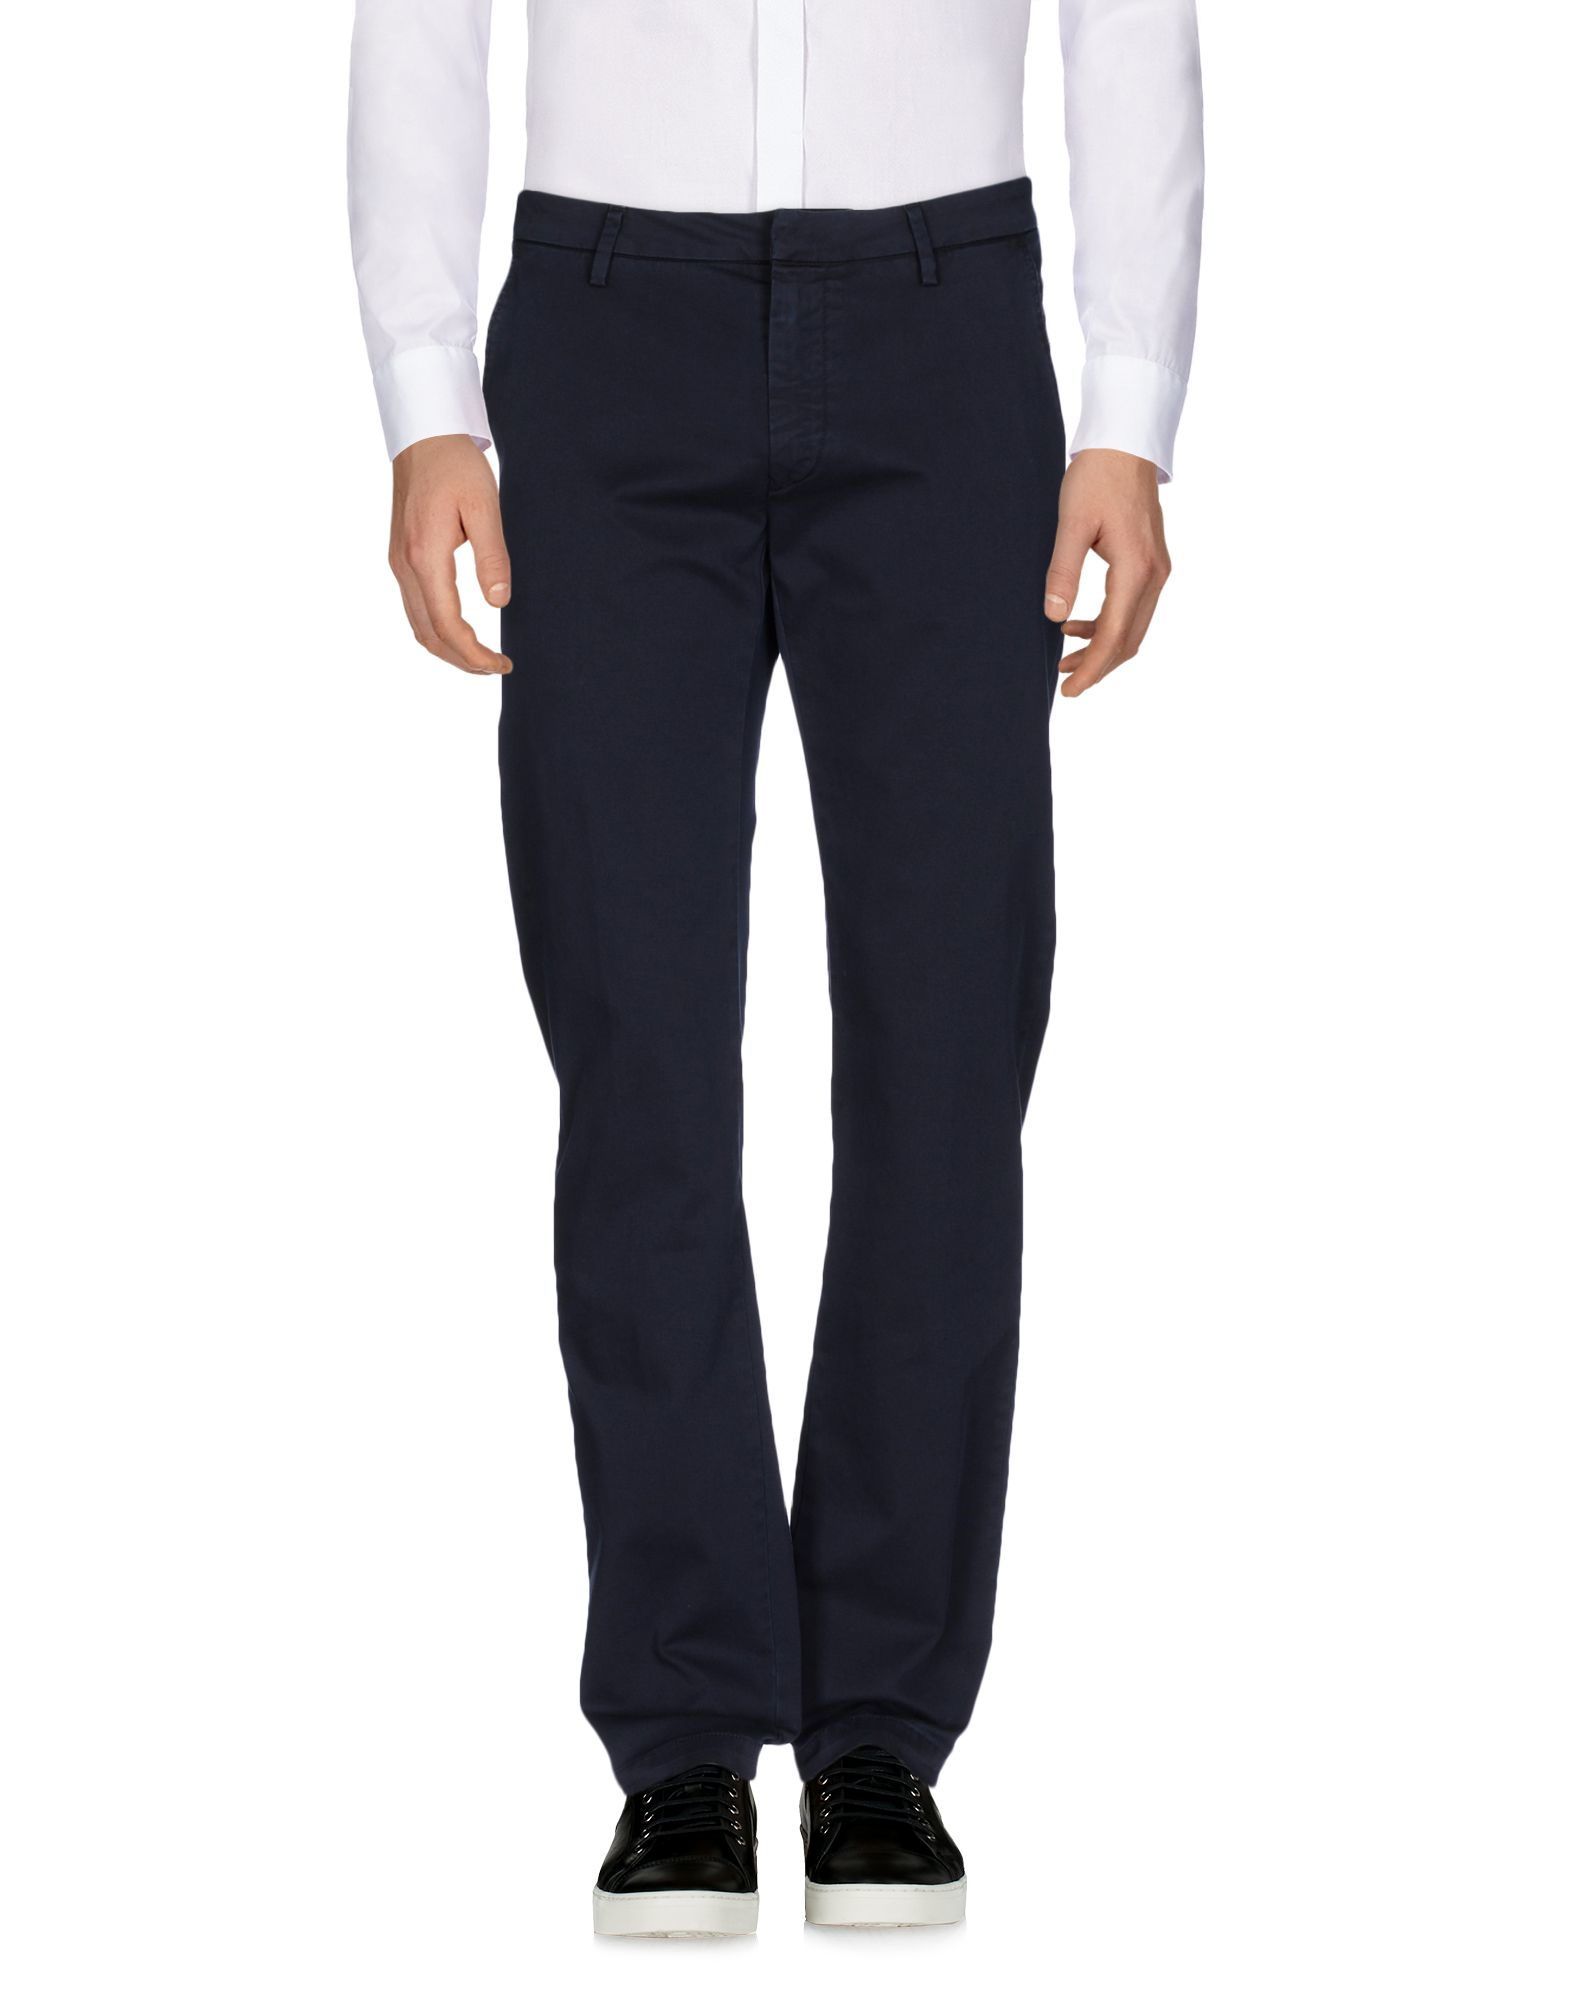 Lyst - True nyc Casual Pants in Blue for Men - Save 37%